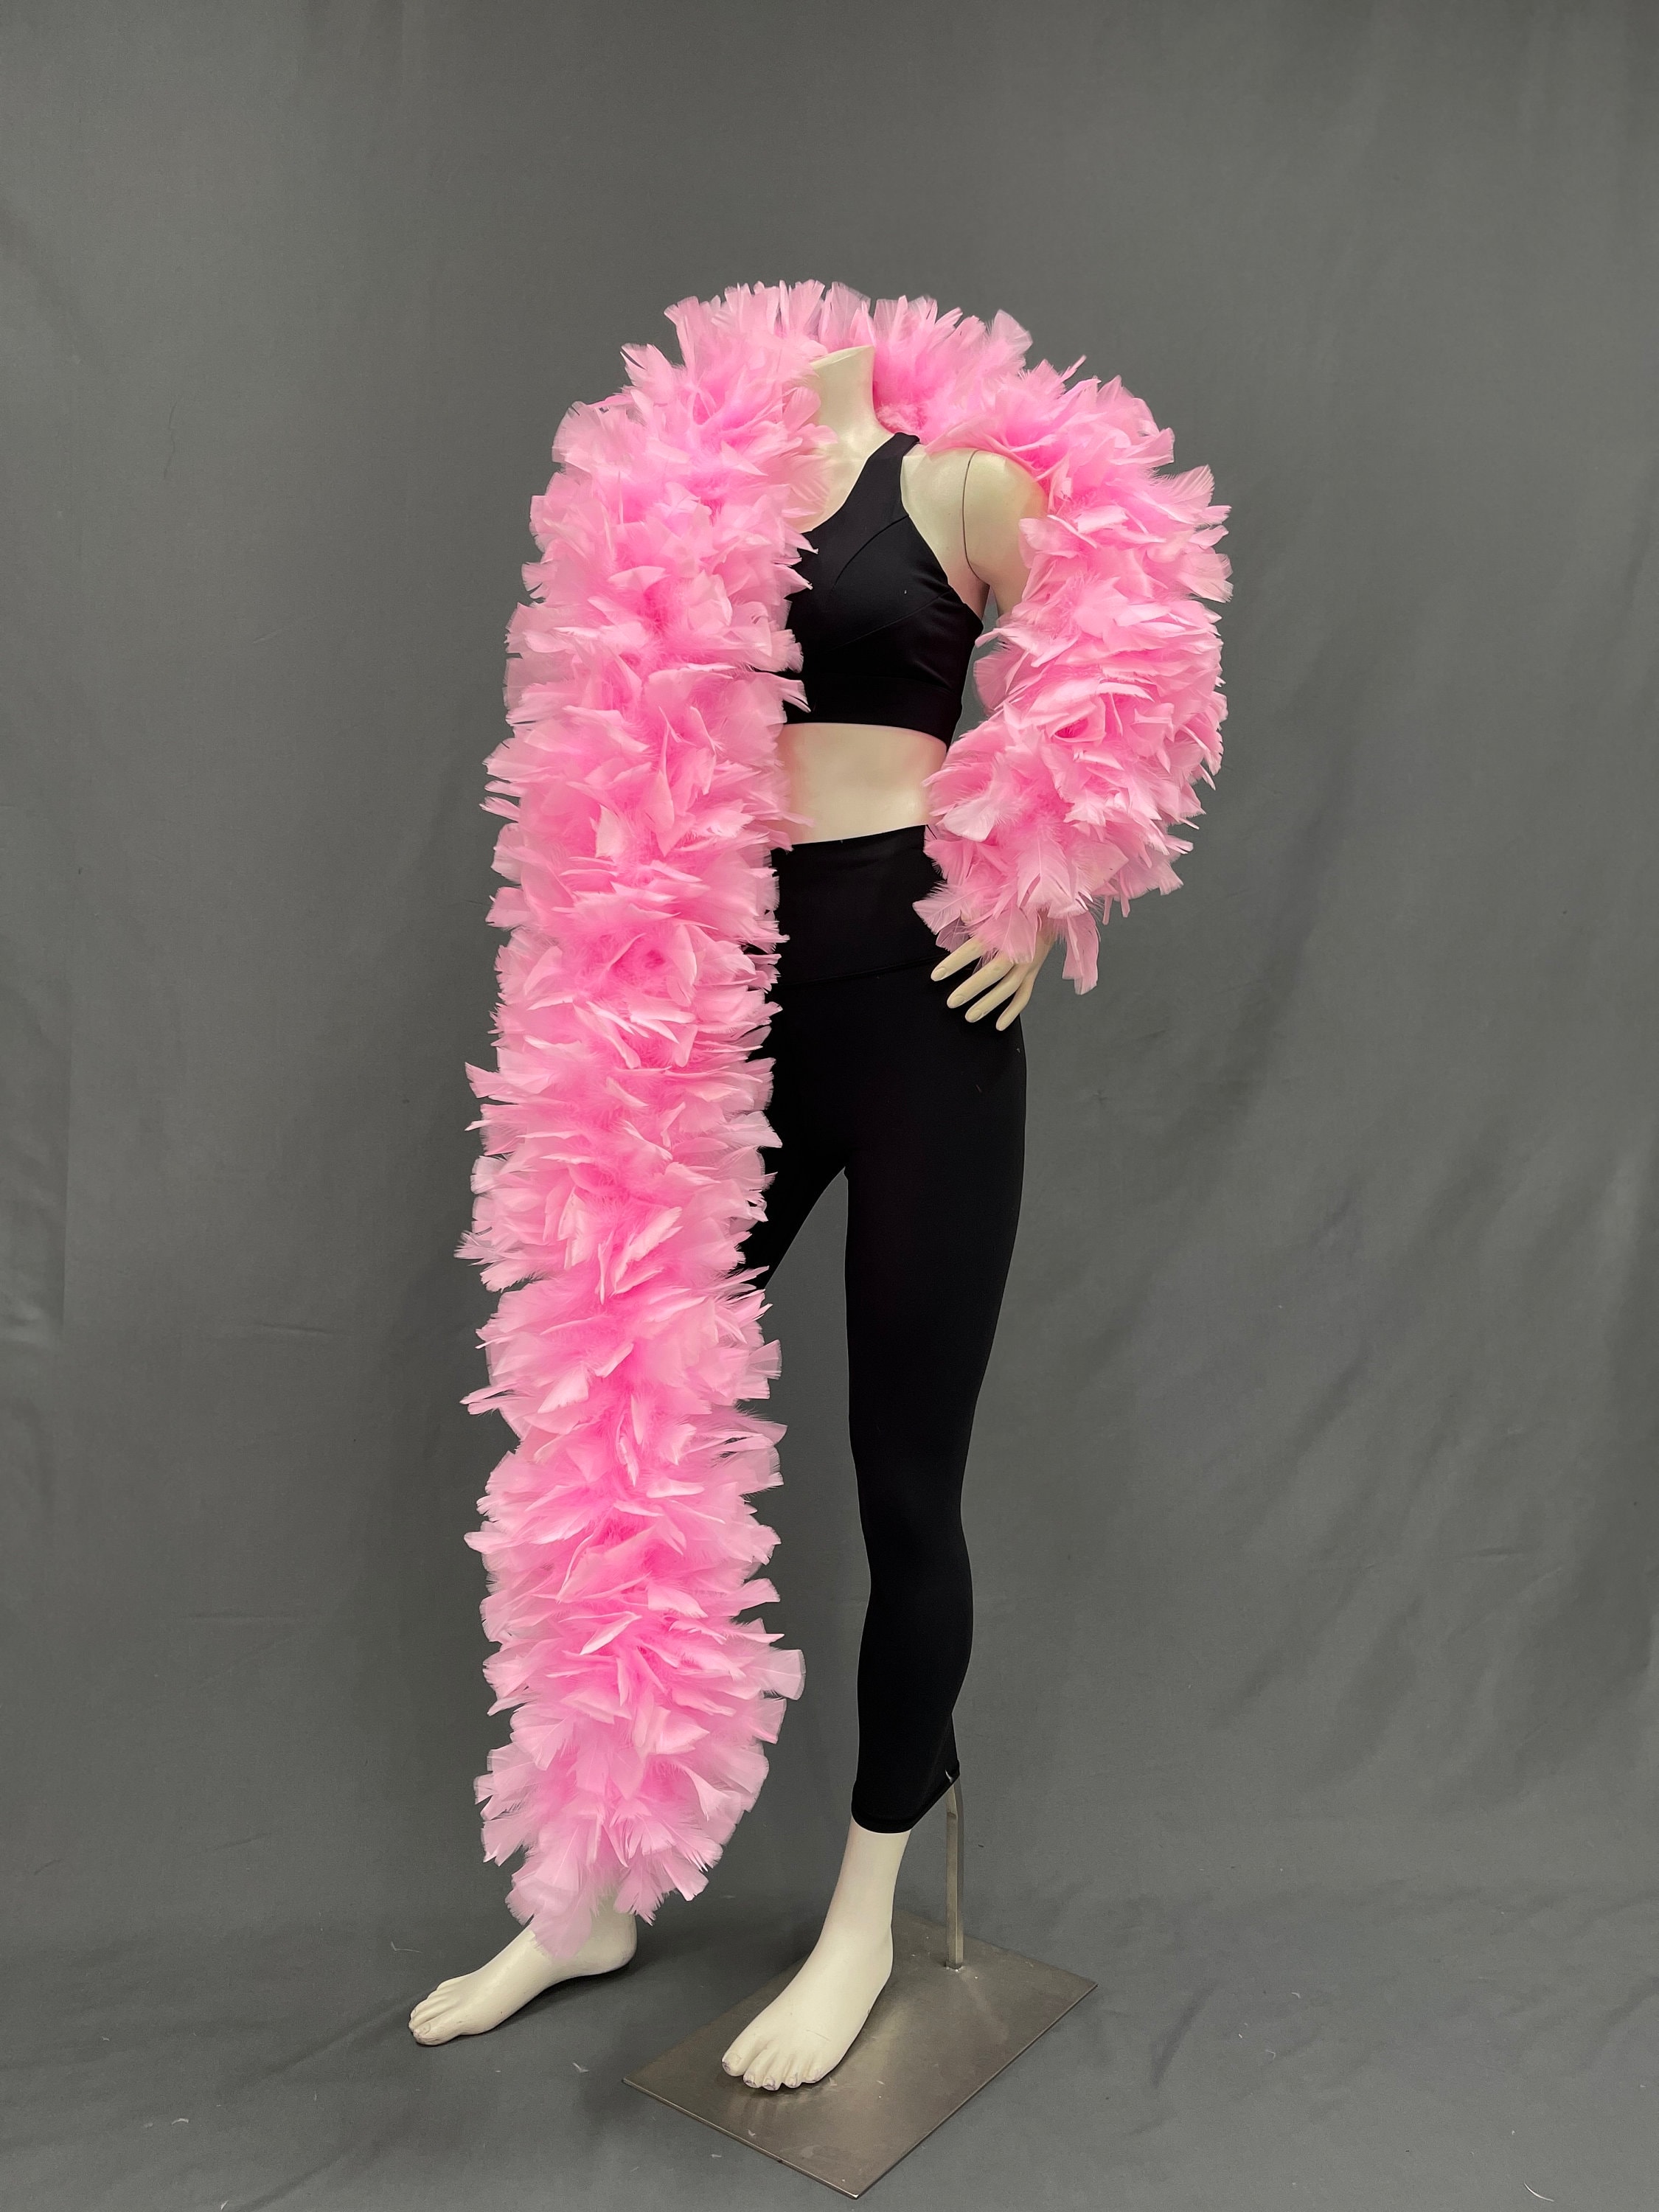 Larryhot Hot Pink Boa Feathers - 45g 2 Yards Boas for Party Bulk,Christmas,Wedding Centerpieces,Concert,Pet and Home Decoration(45g-HotPink)